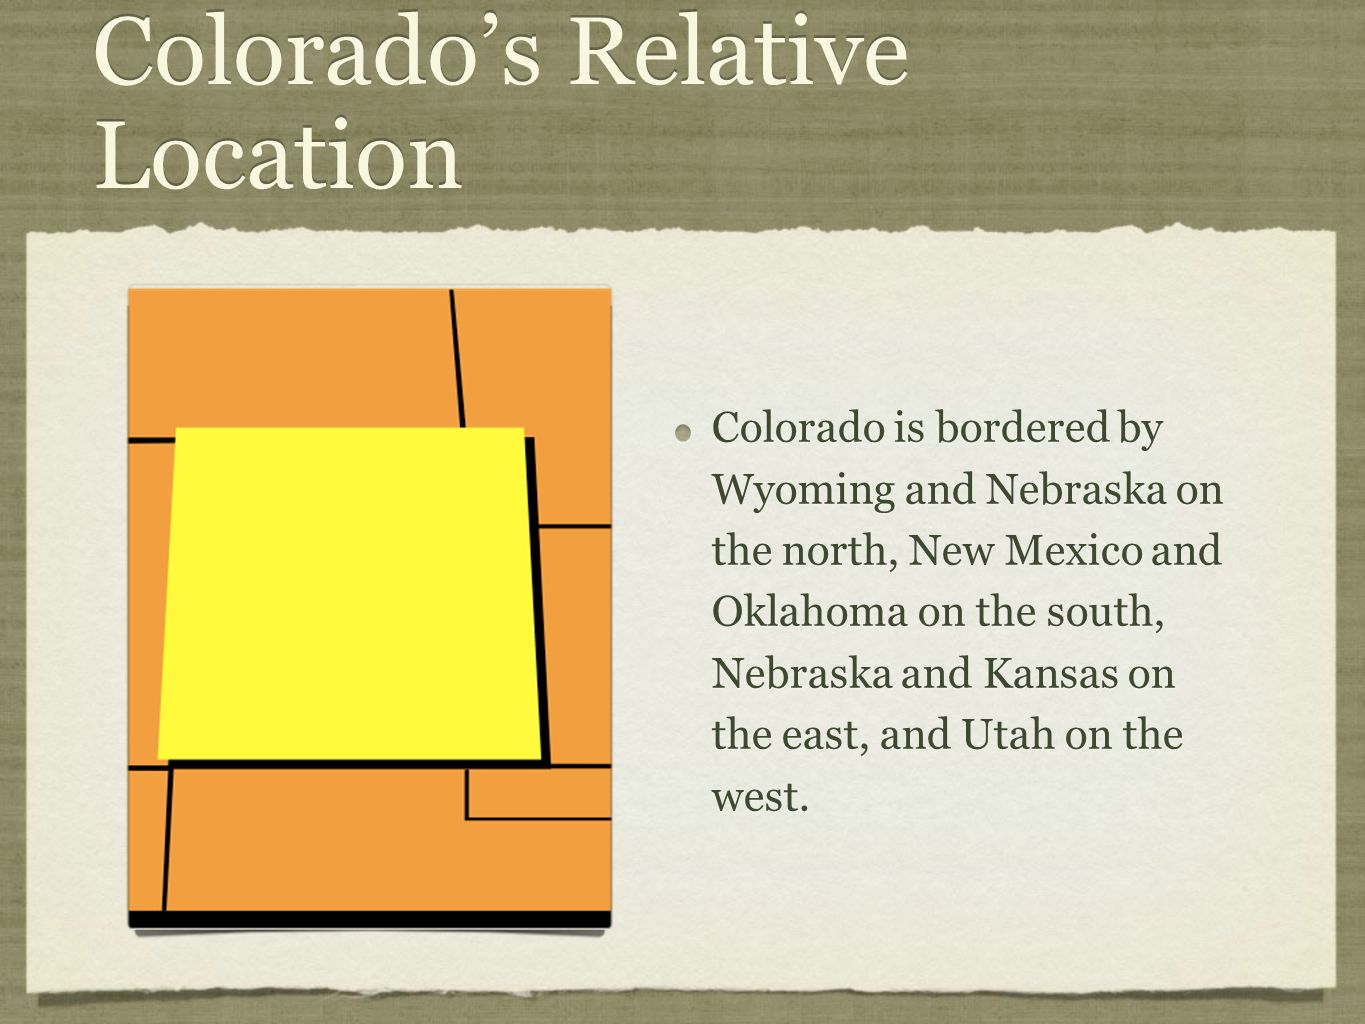 Colorado’s Relative Location Colorado is bordered by Wyoming and Nebraska on the north, New Mexico and Oklahoma on the south, Nebraska and Kansas on the east, and Utah on the west.